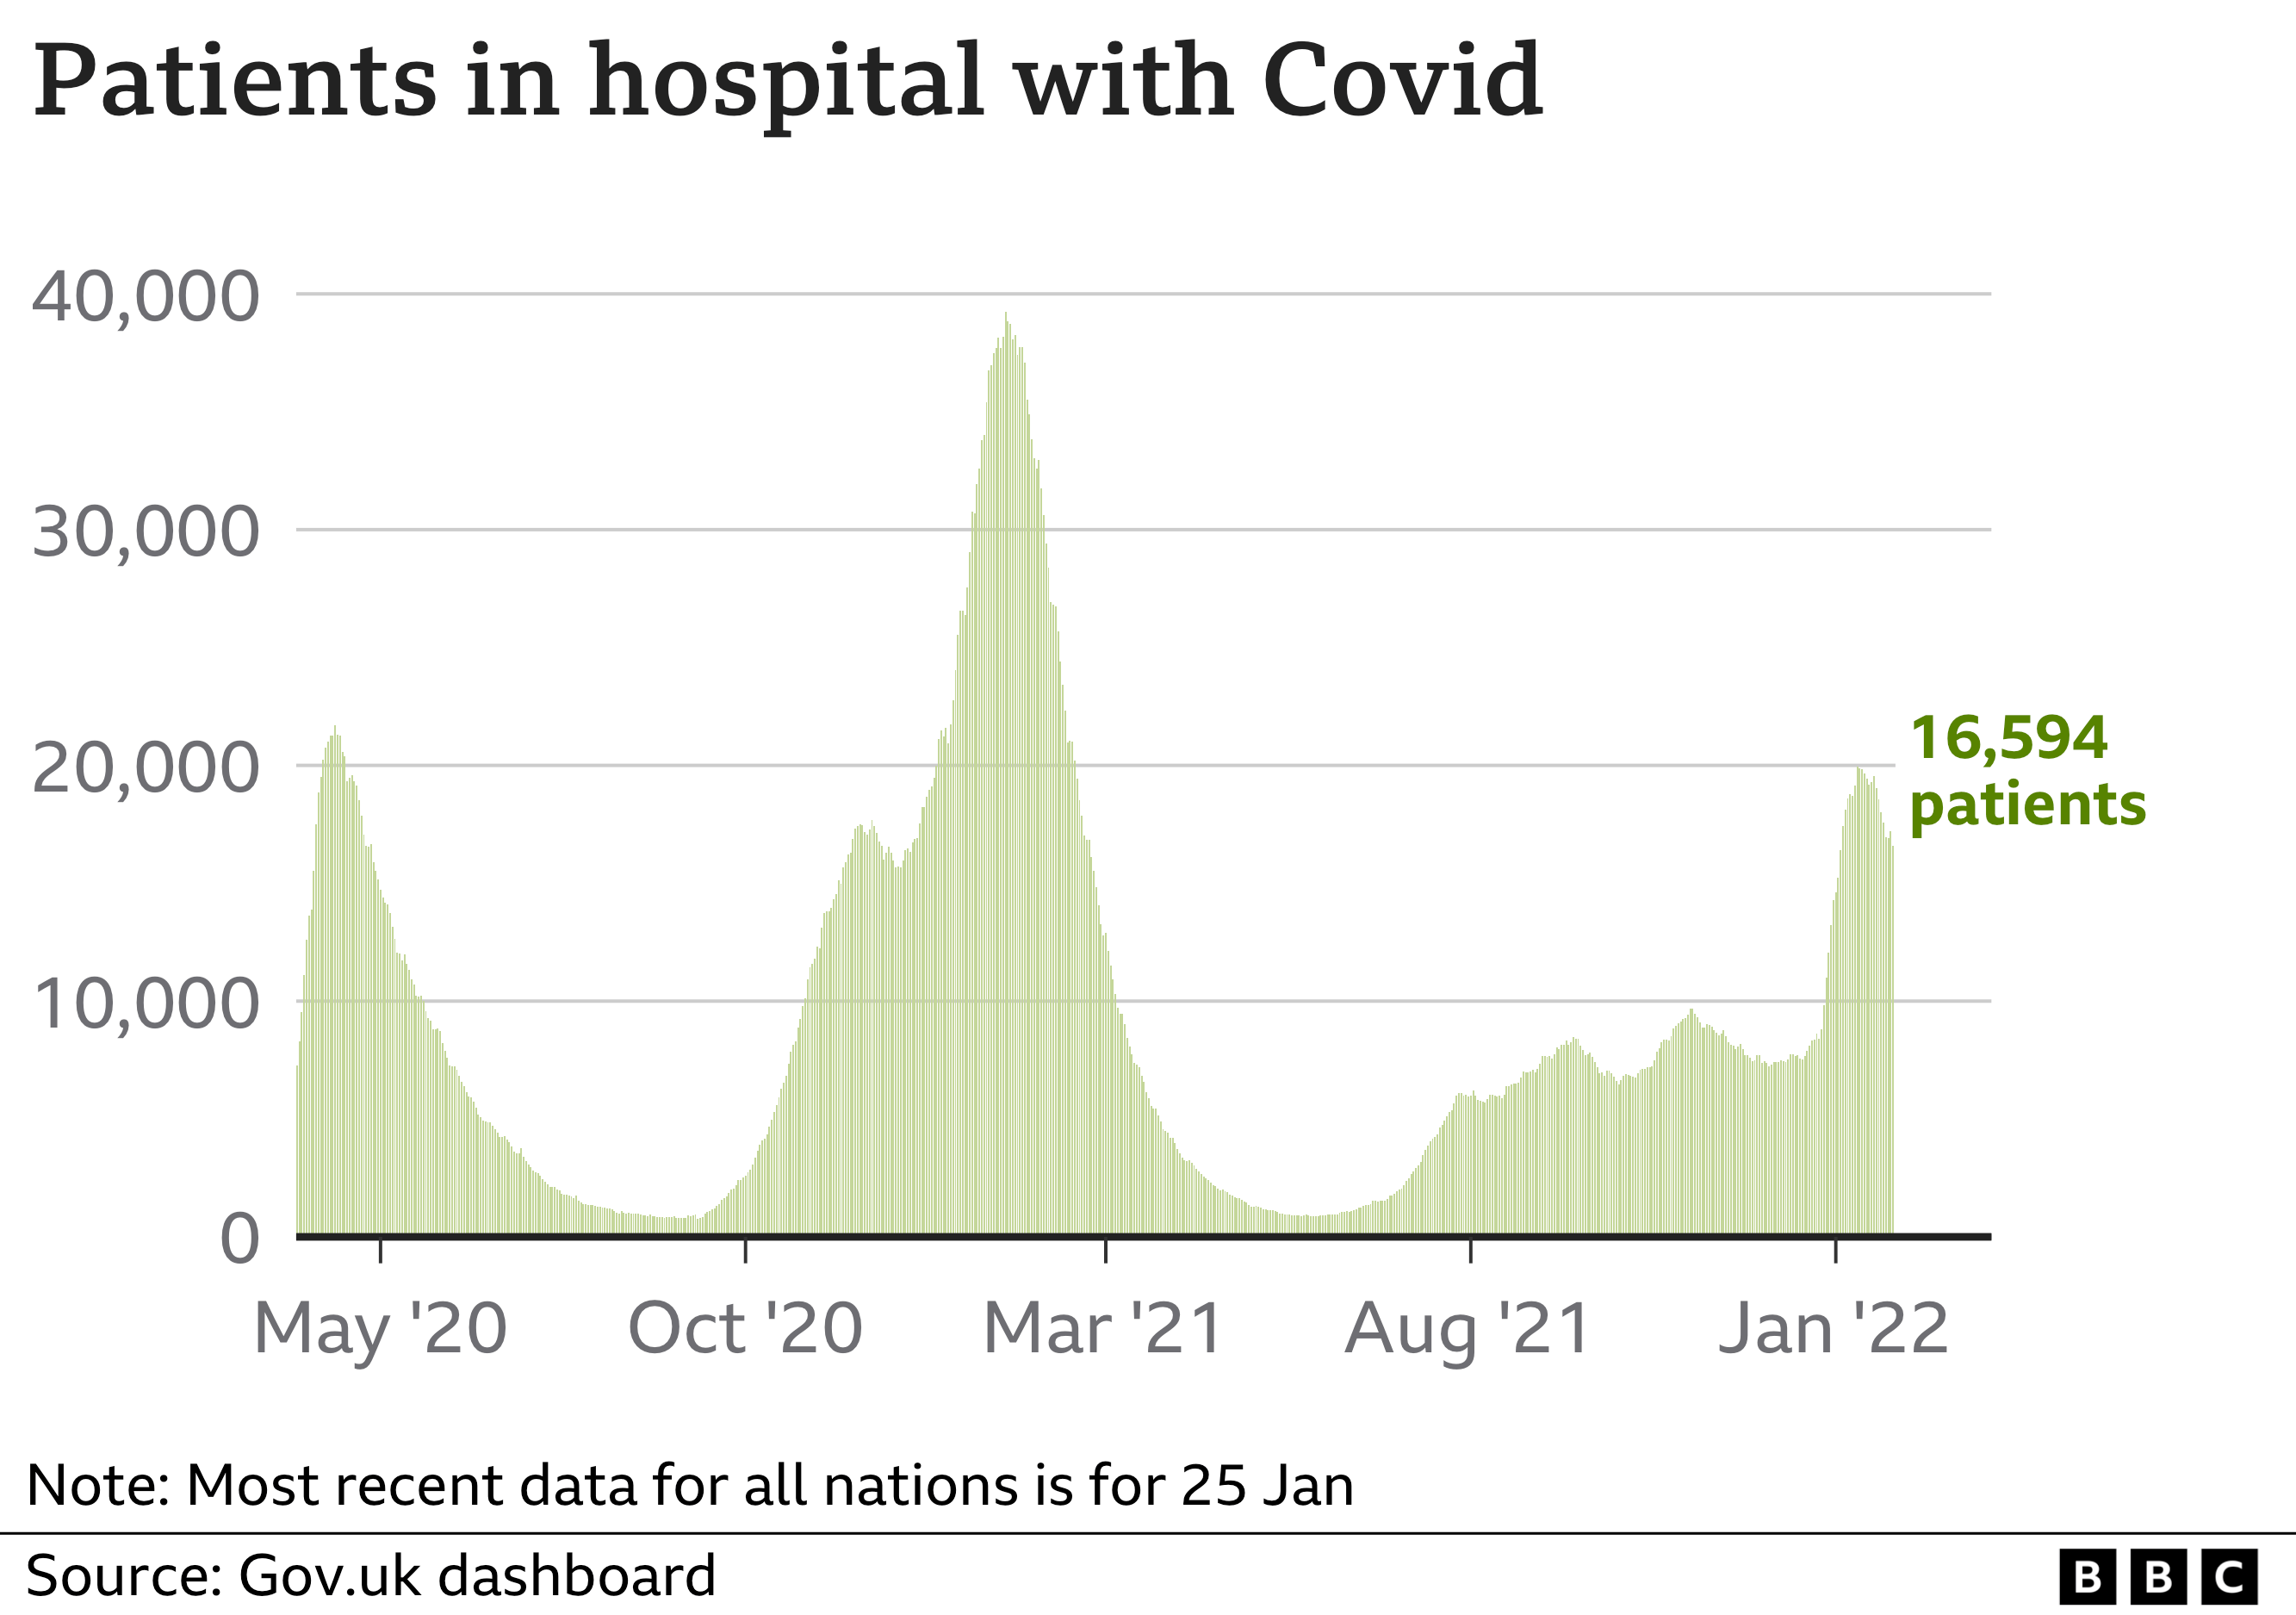 Chart showing the number of patients in hospital with coronavirus in the UK